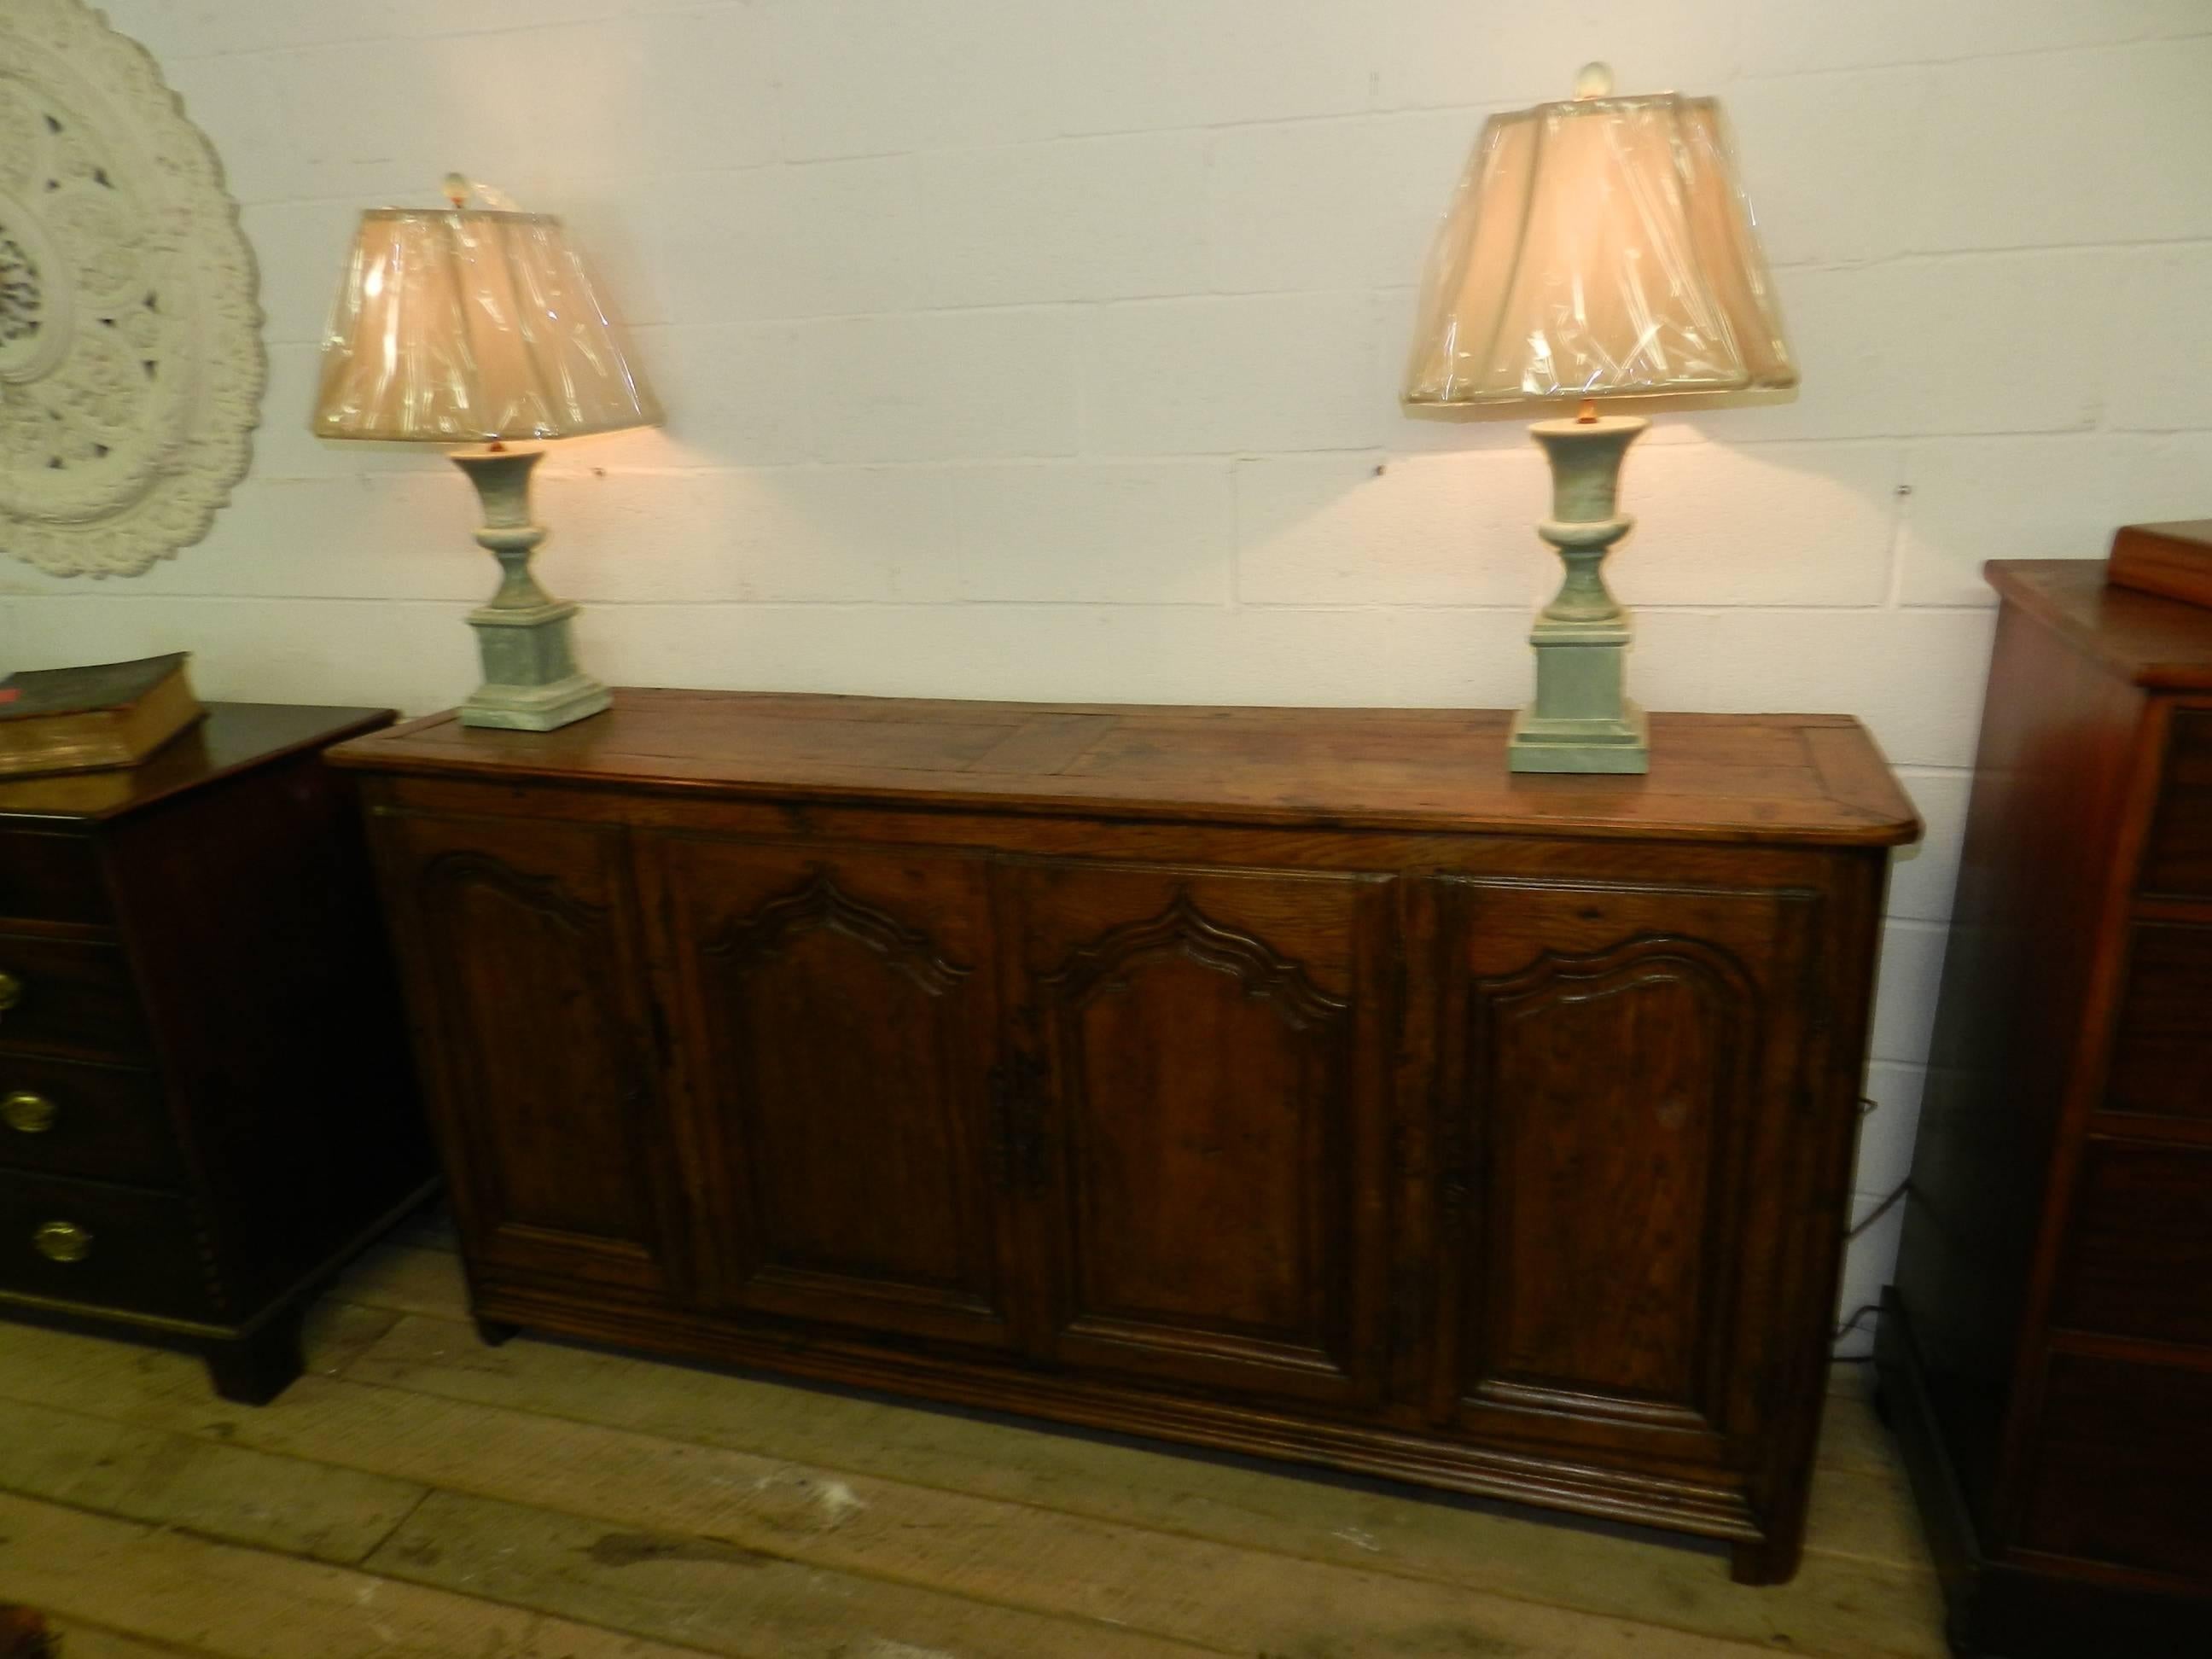 Antique French solid oak buffet with four-panel doors and paneled sides.